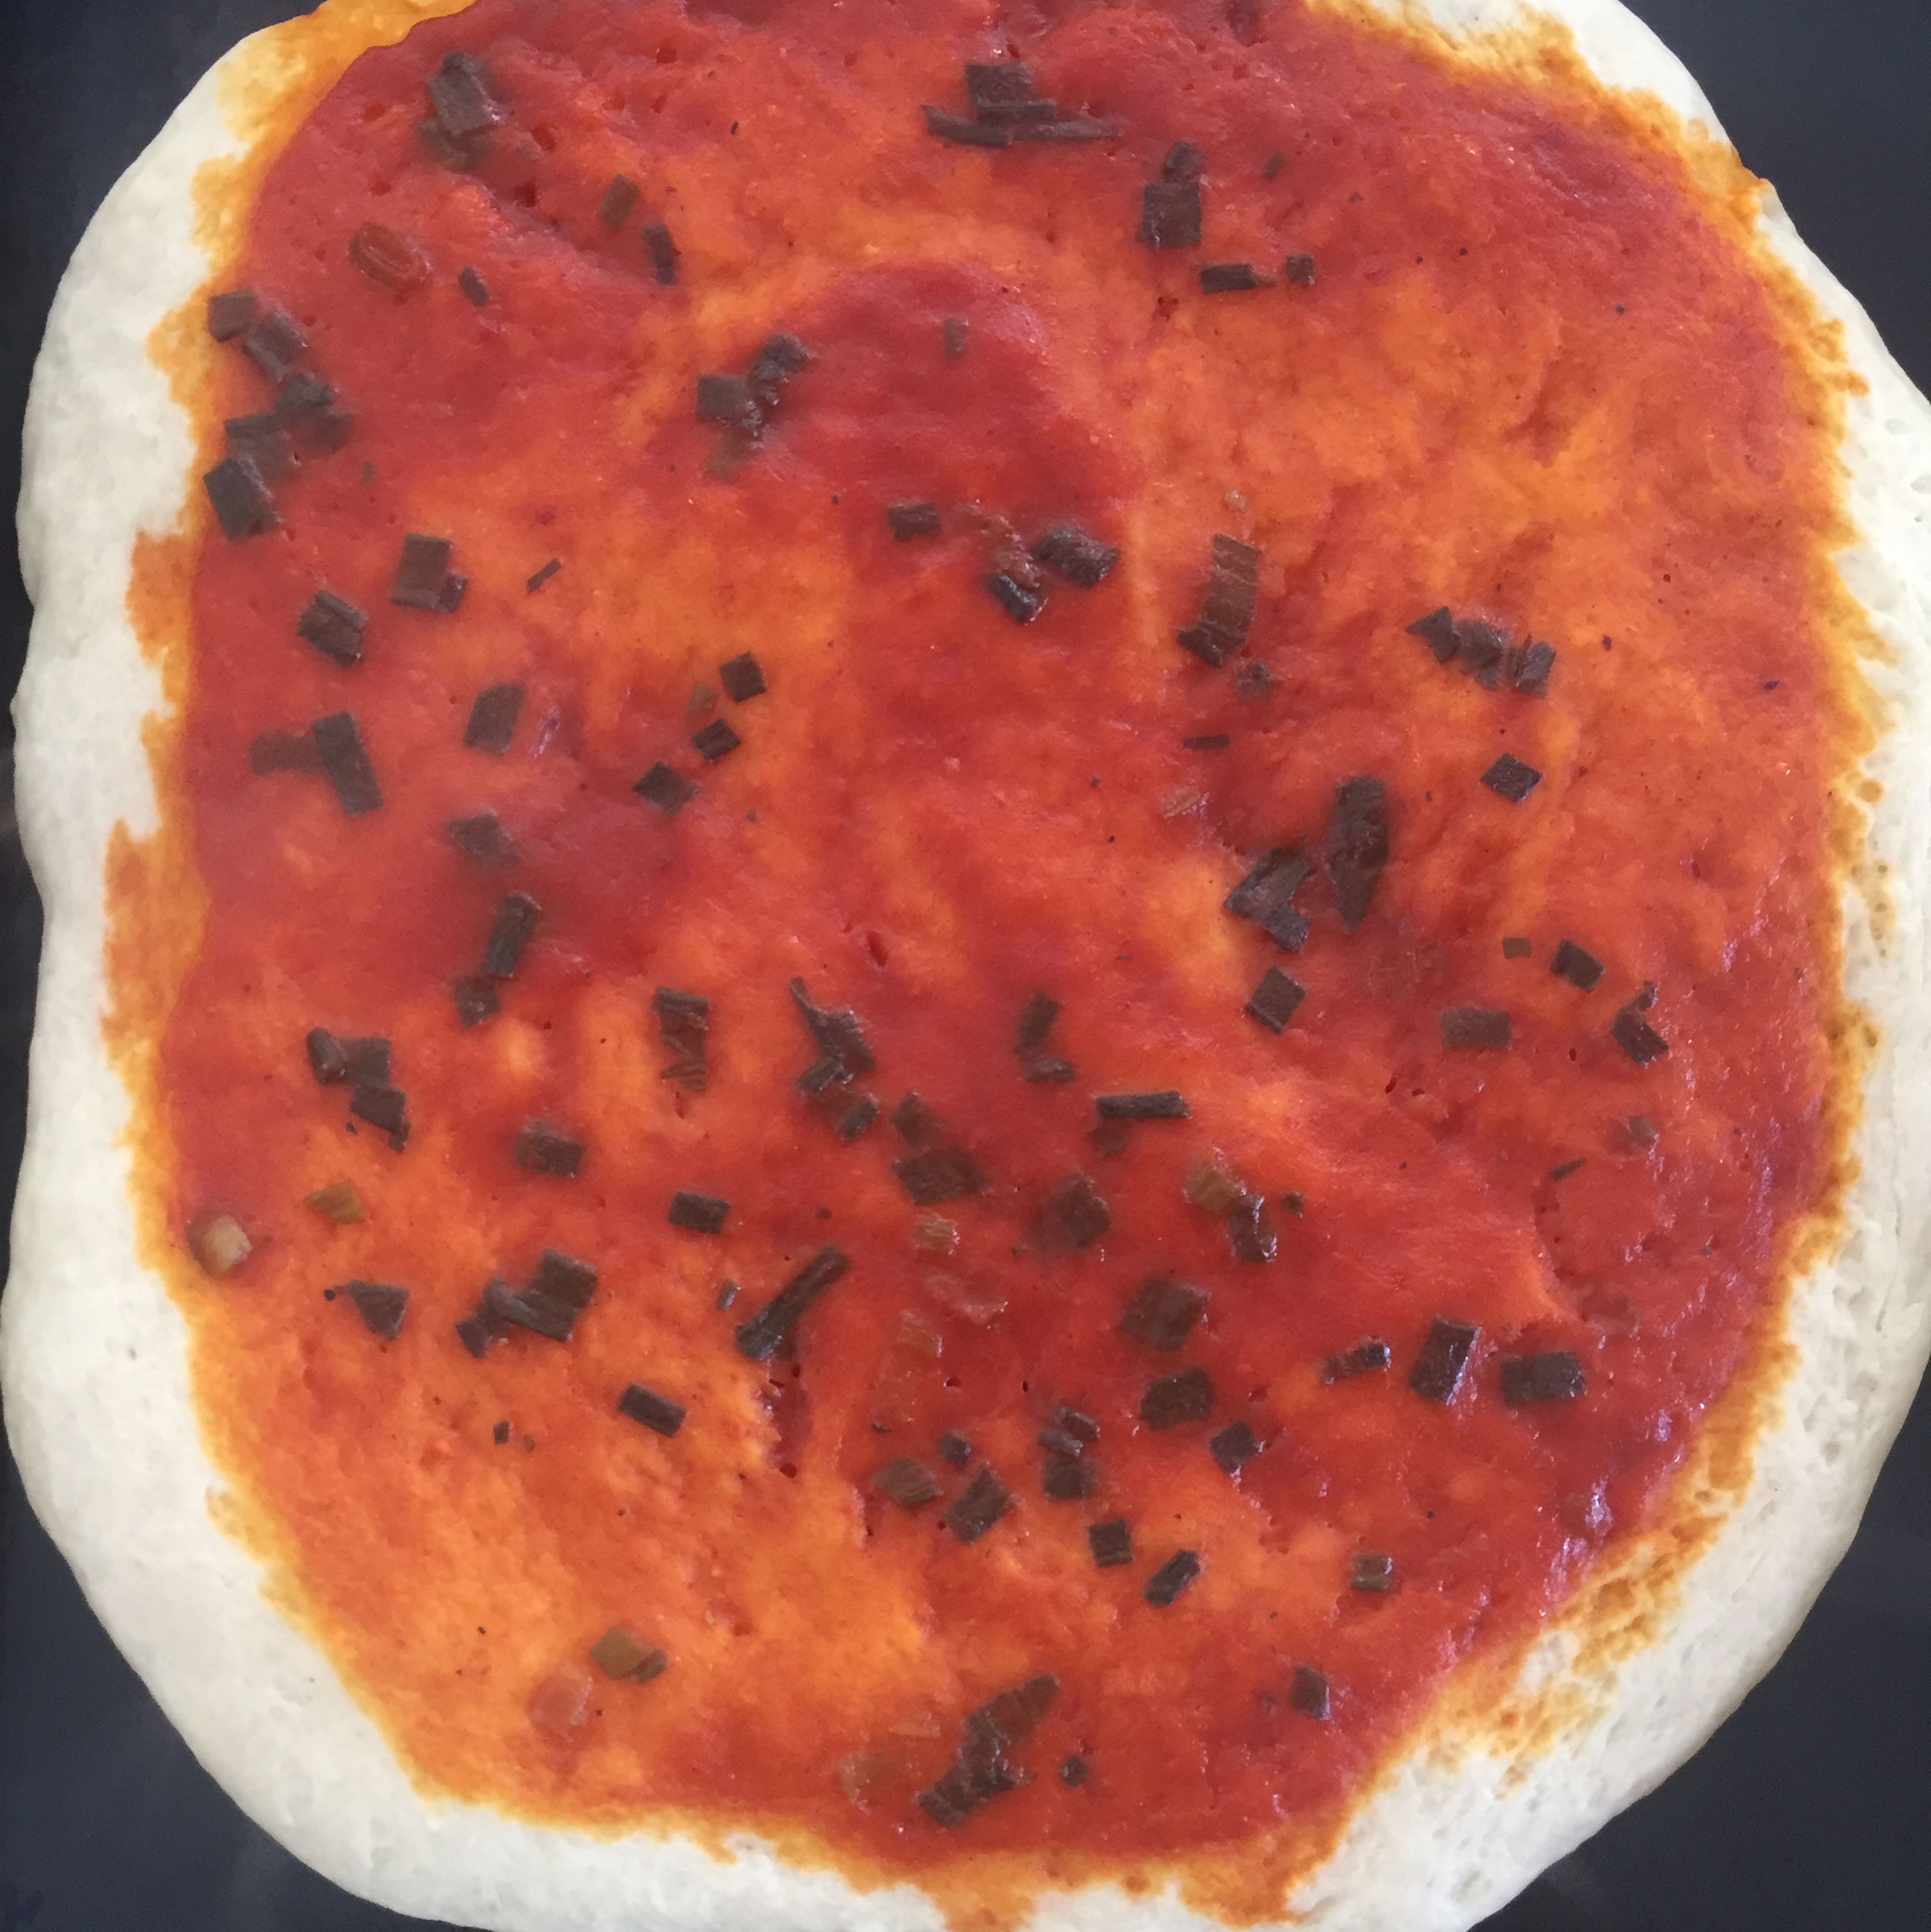 place rolled dough over a baking pan (make sure to oil it before.), and coat with tomato sauce, leaving a bit of a crust. Bake at 475 degrees Farenheit (220 degrees Celsius) for about twenty minutes, or until the bottom of the crust is golden brown.